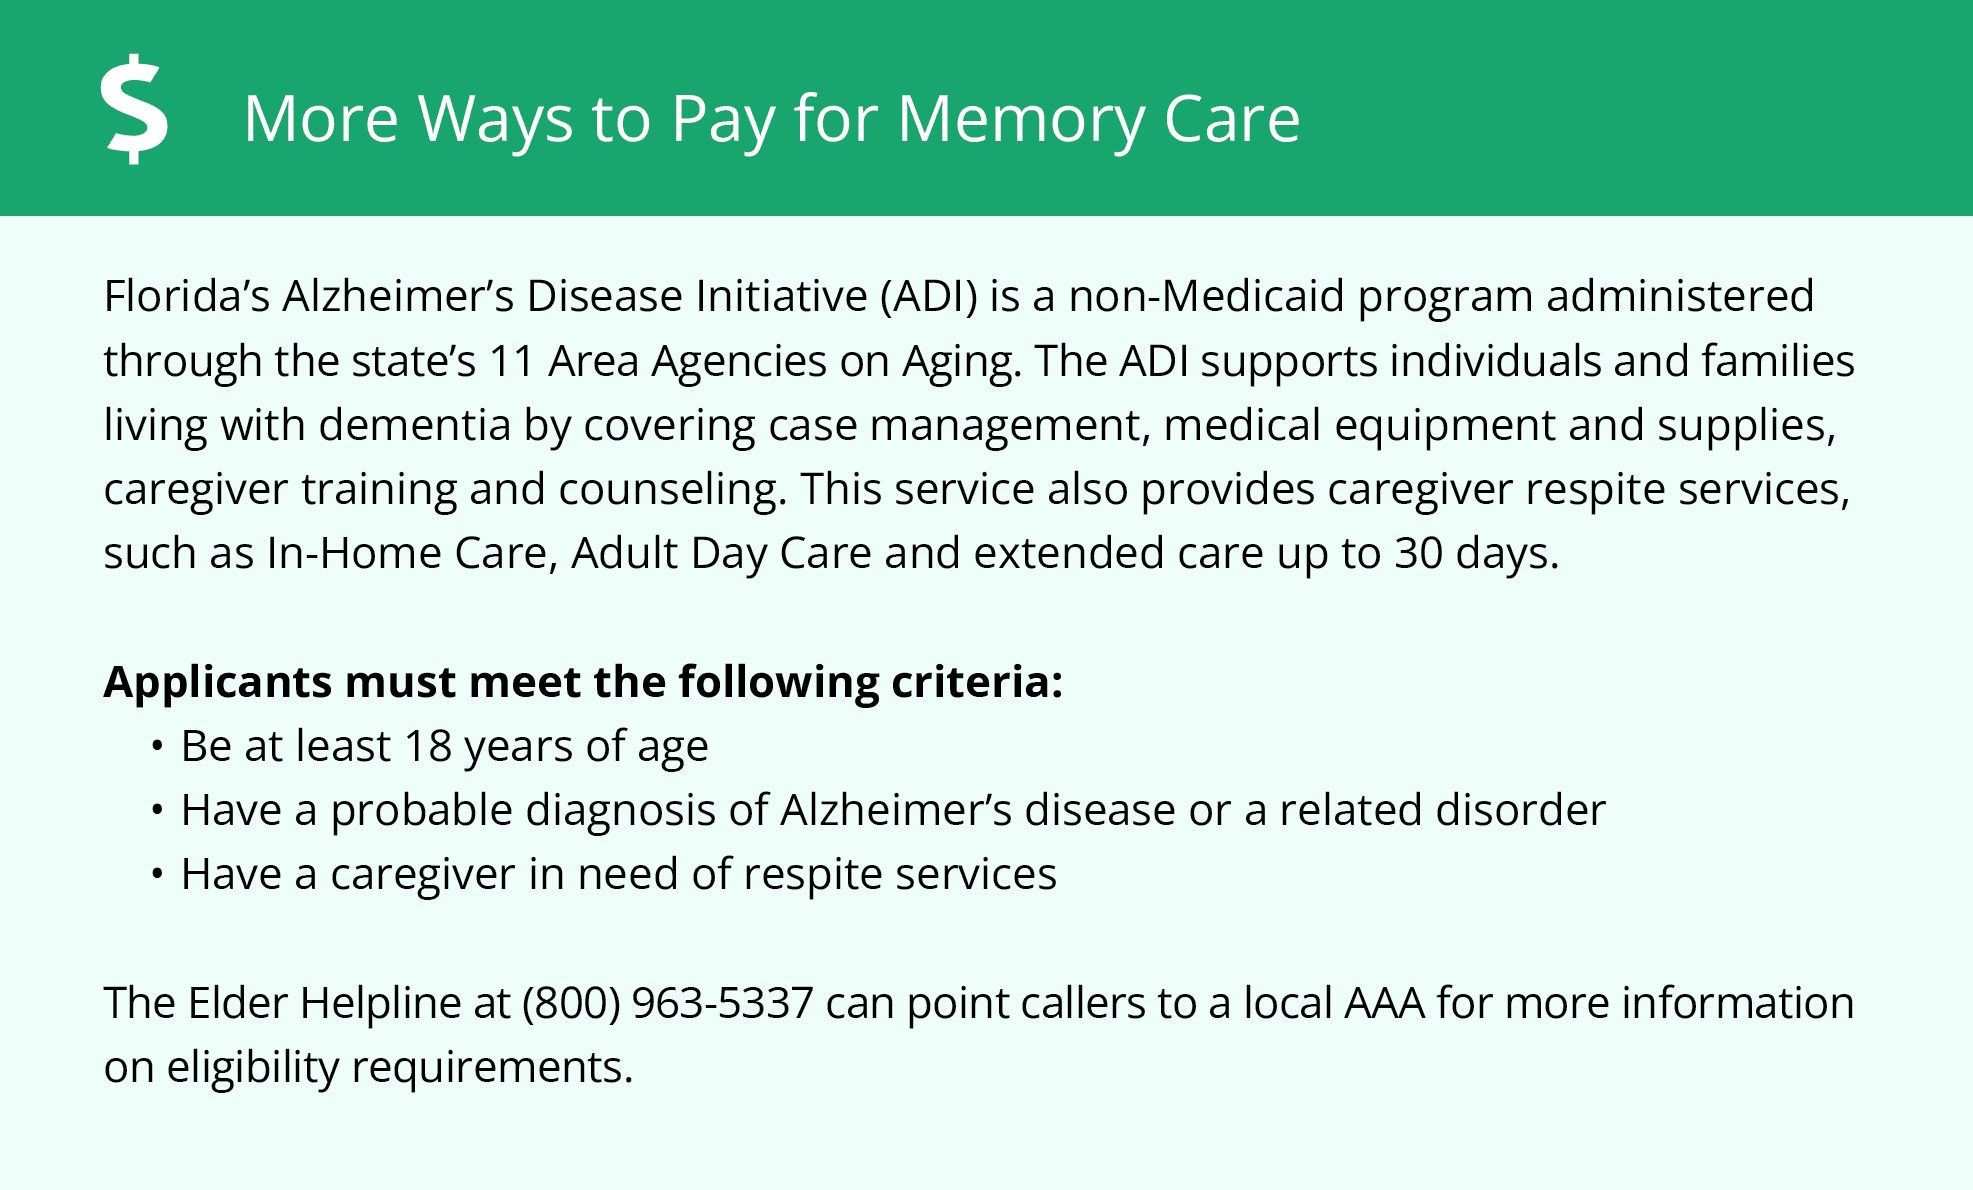 More ways to pay for memory care in Florida